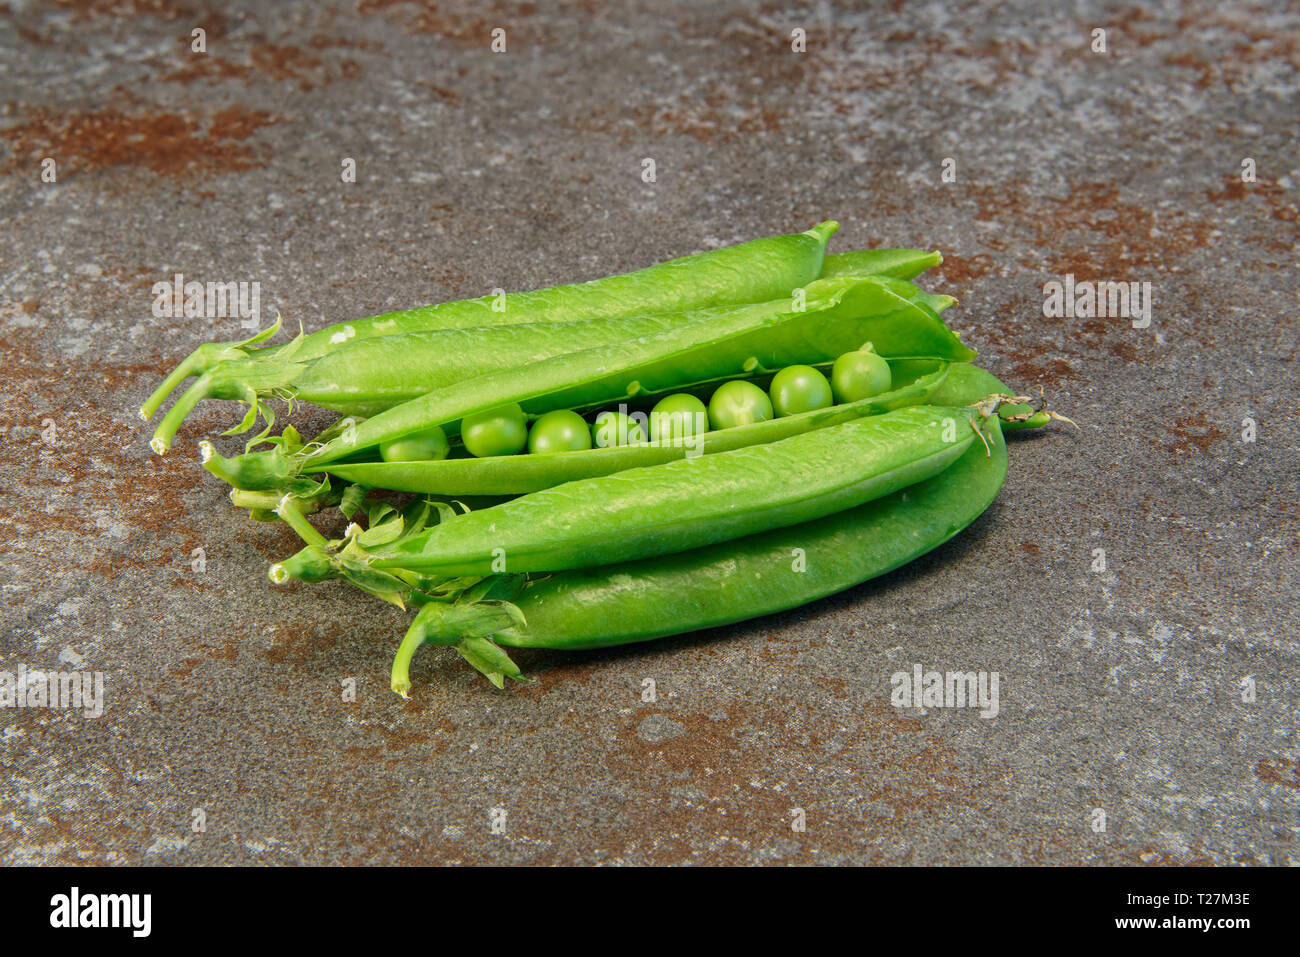 A pile of fresh green peas, one pod opened, placed on a kitchen worktop tile. Stock Photo